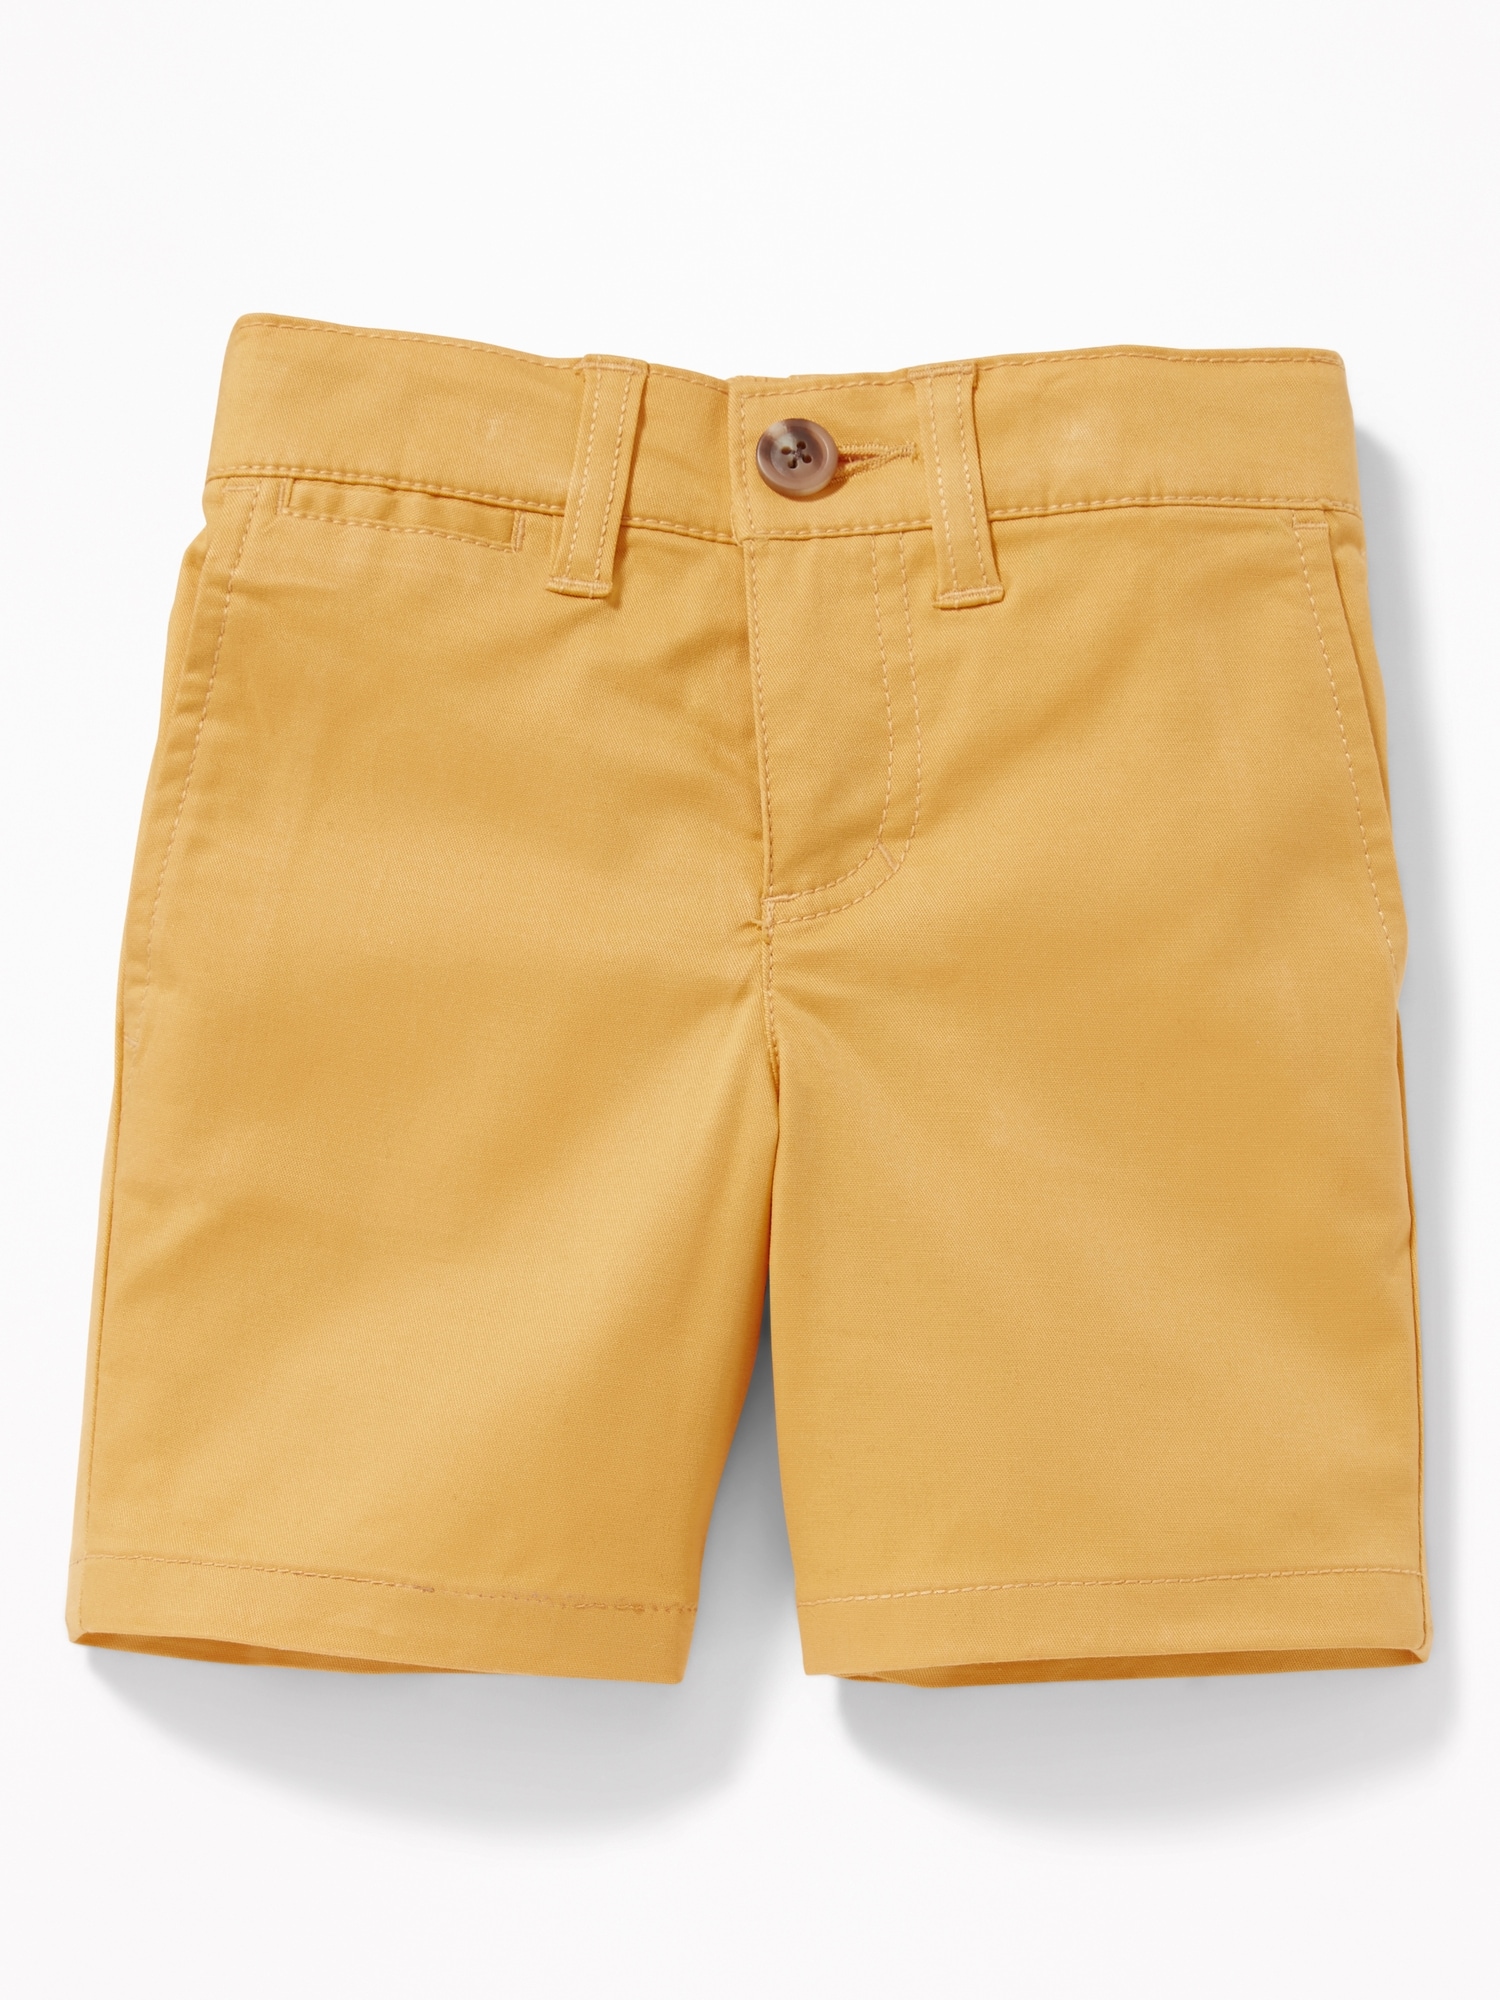 ON - Kids 'Red' Built-In Flex Straight Twill Cotton Shorts ON192 